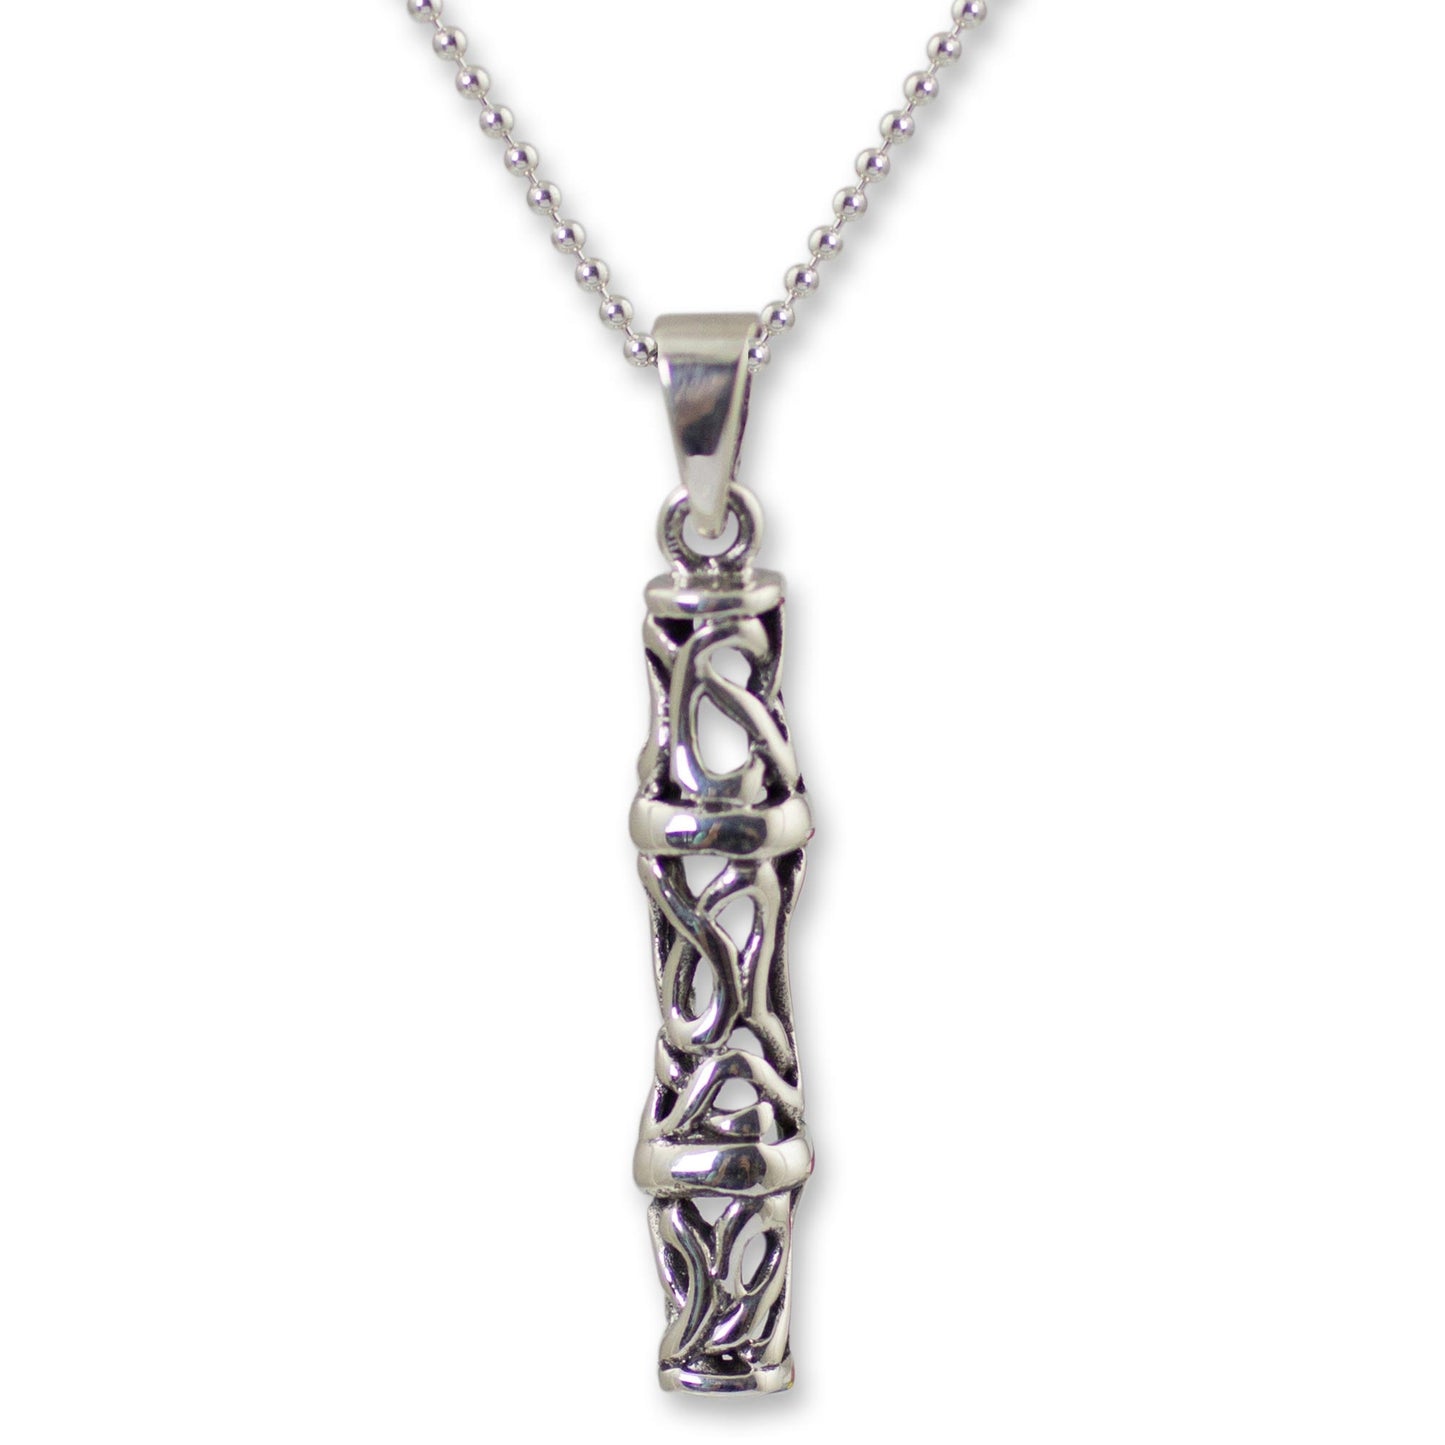 Bamboo Filigree Sterling Silver Necklace